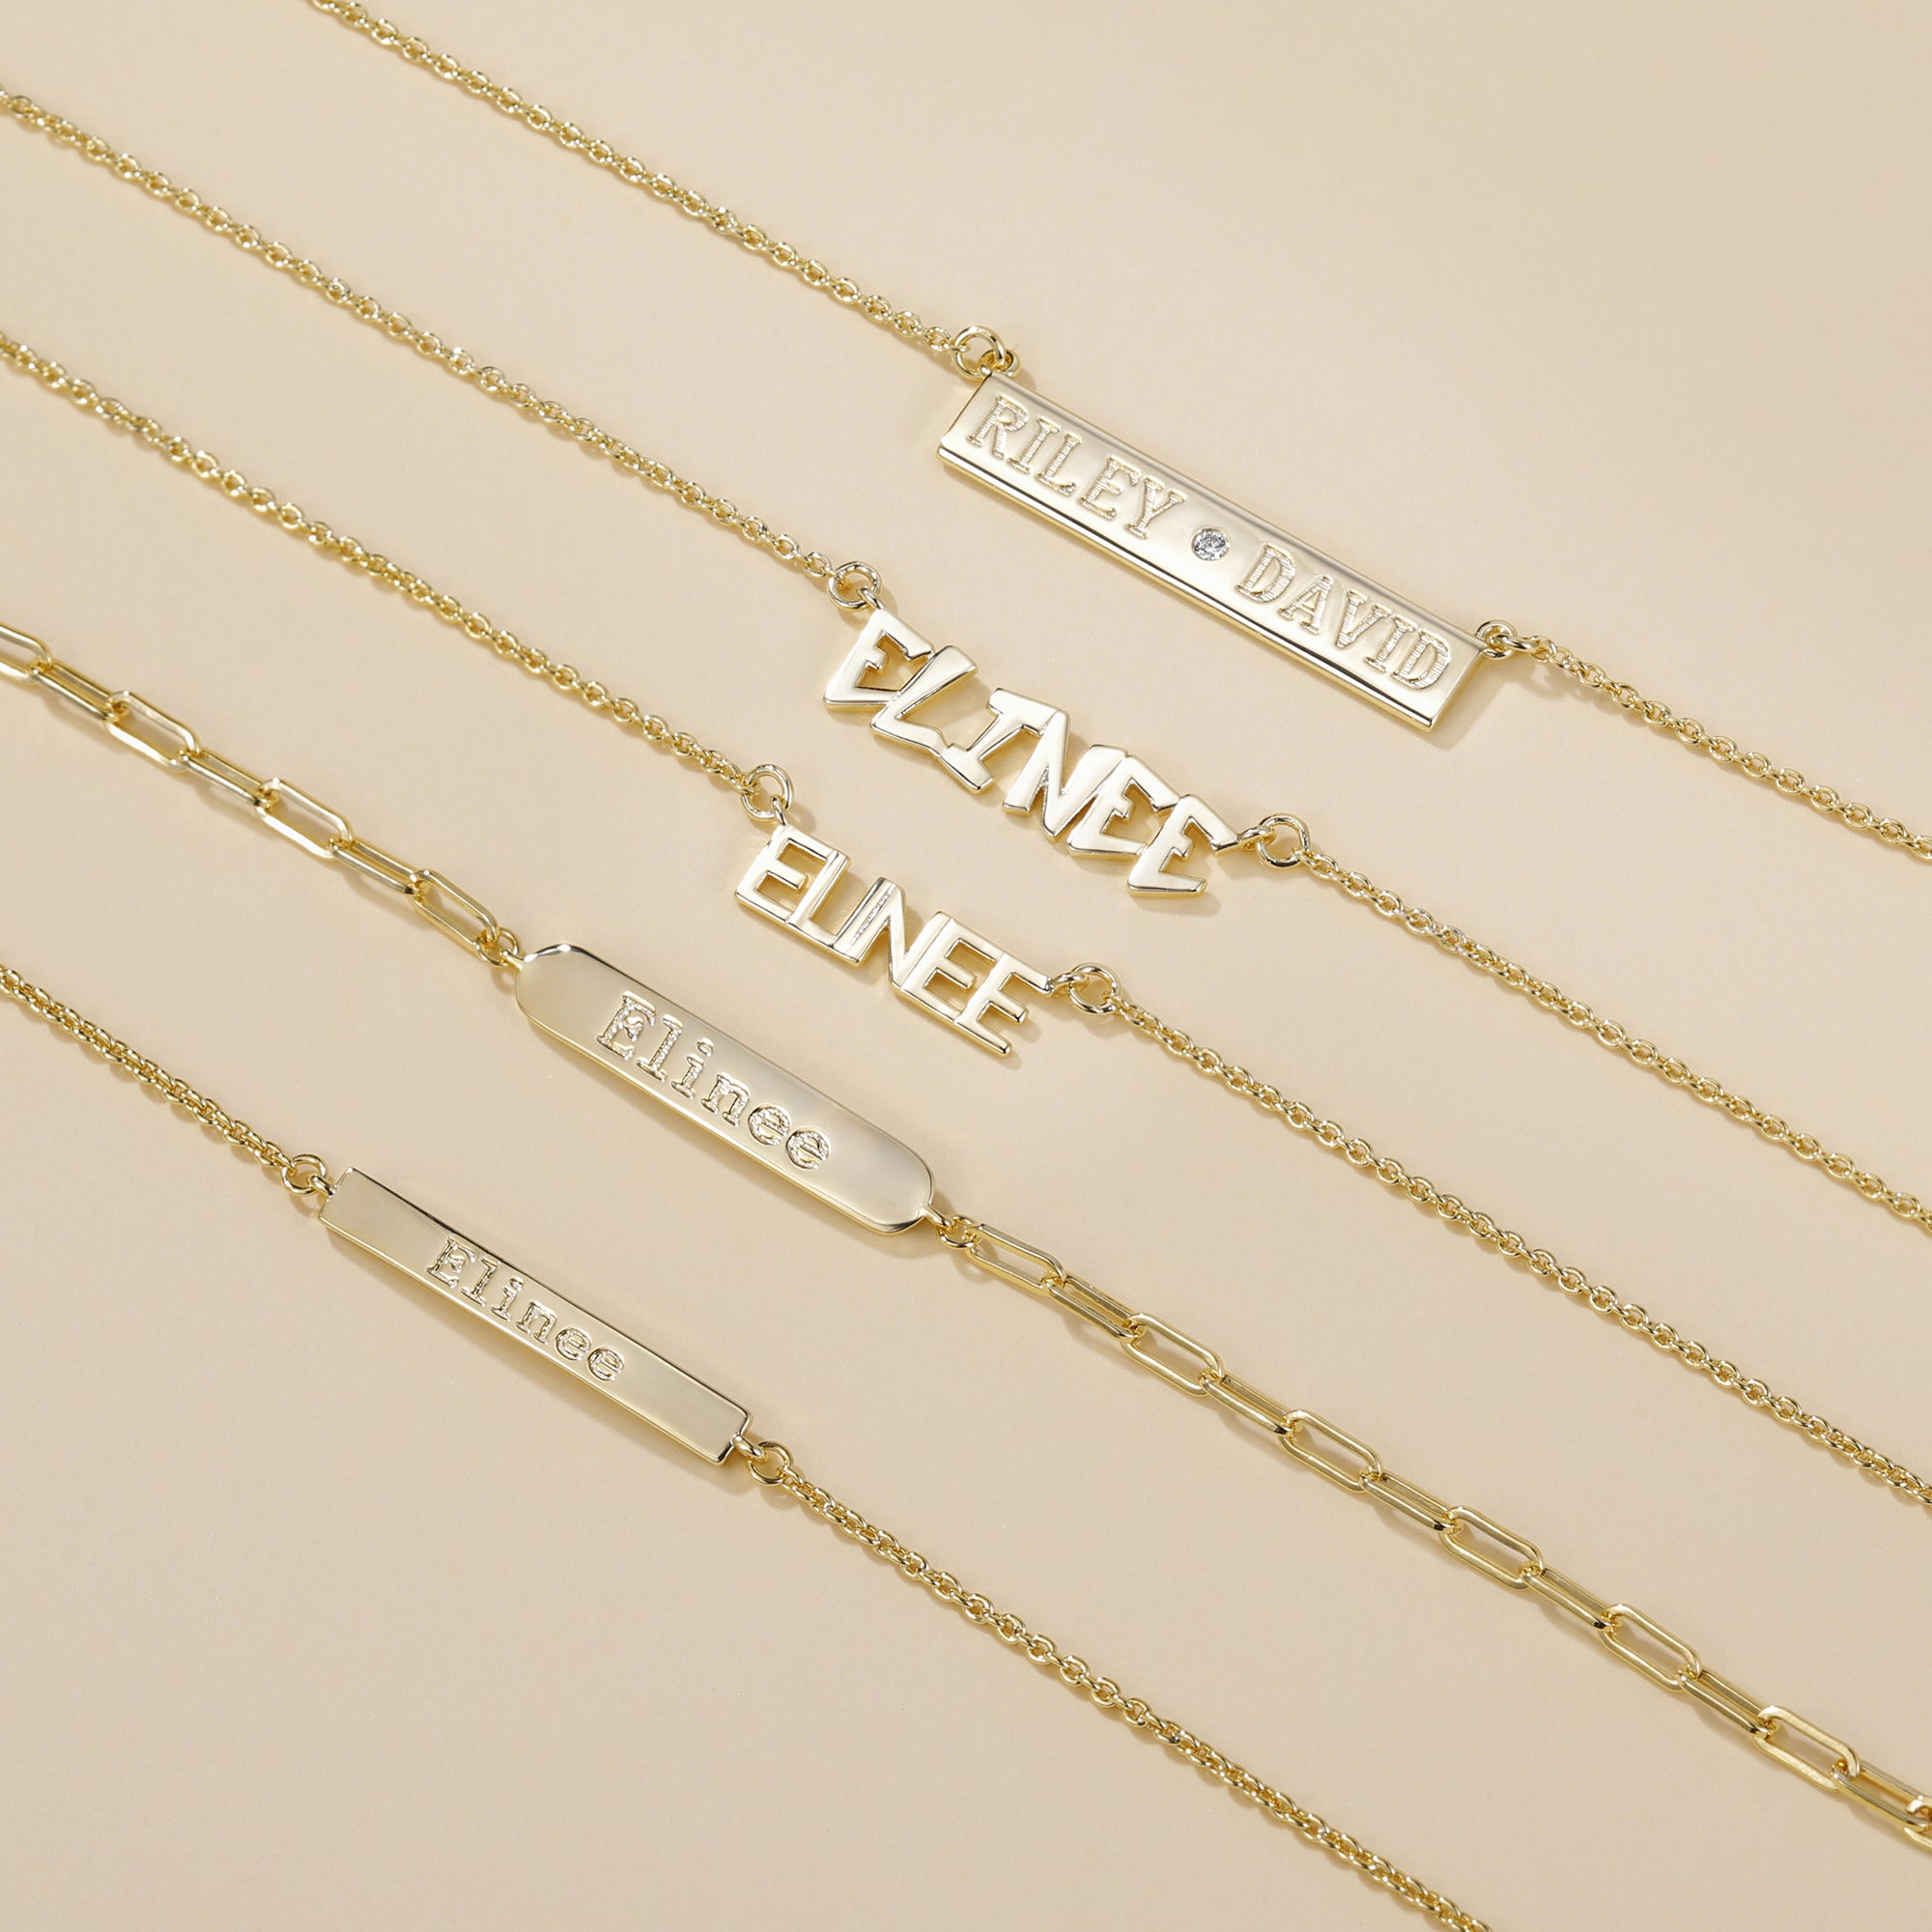 What to Write on Engraved Jewelry: Personalize Your Precious Pieces